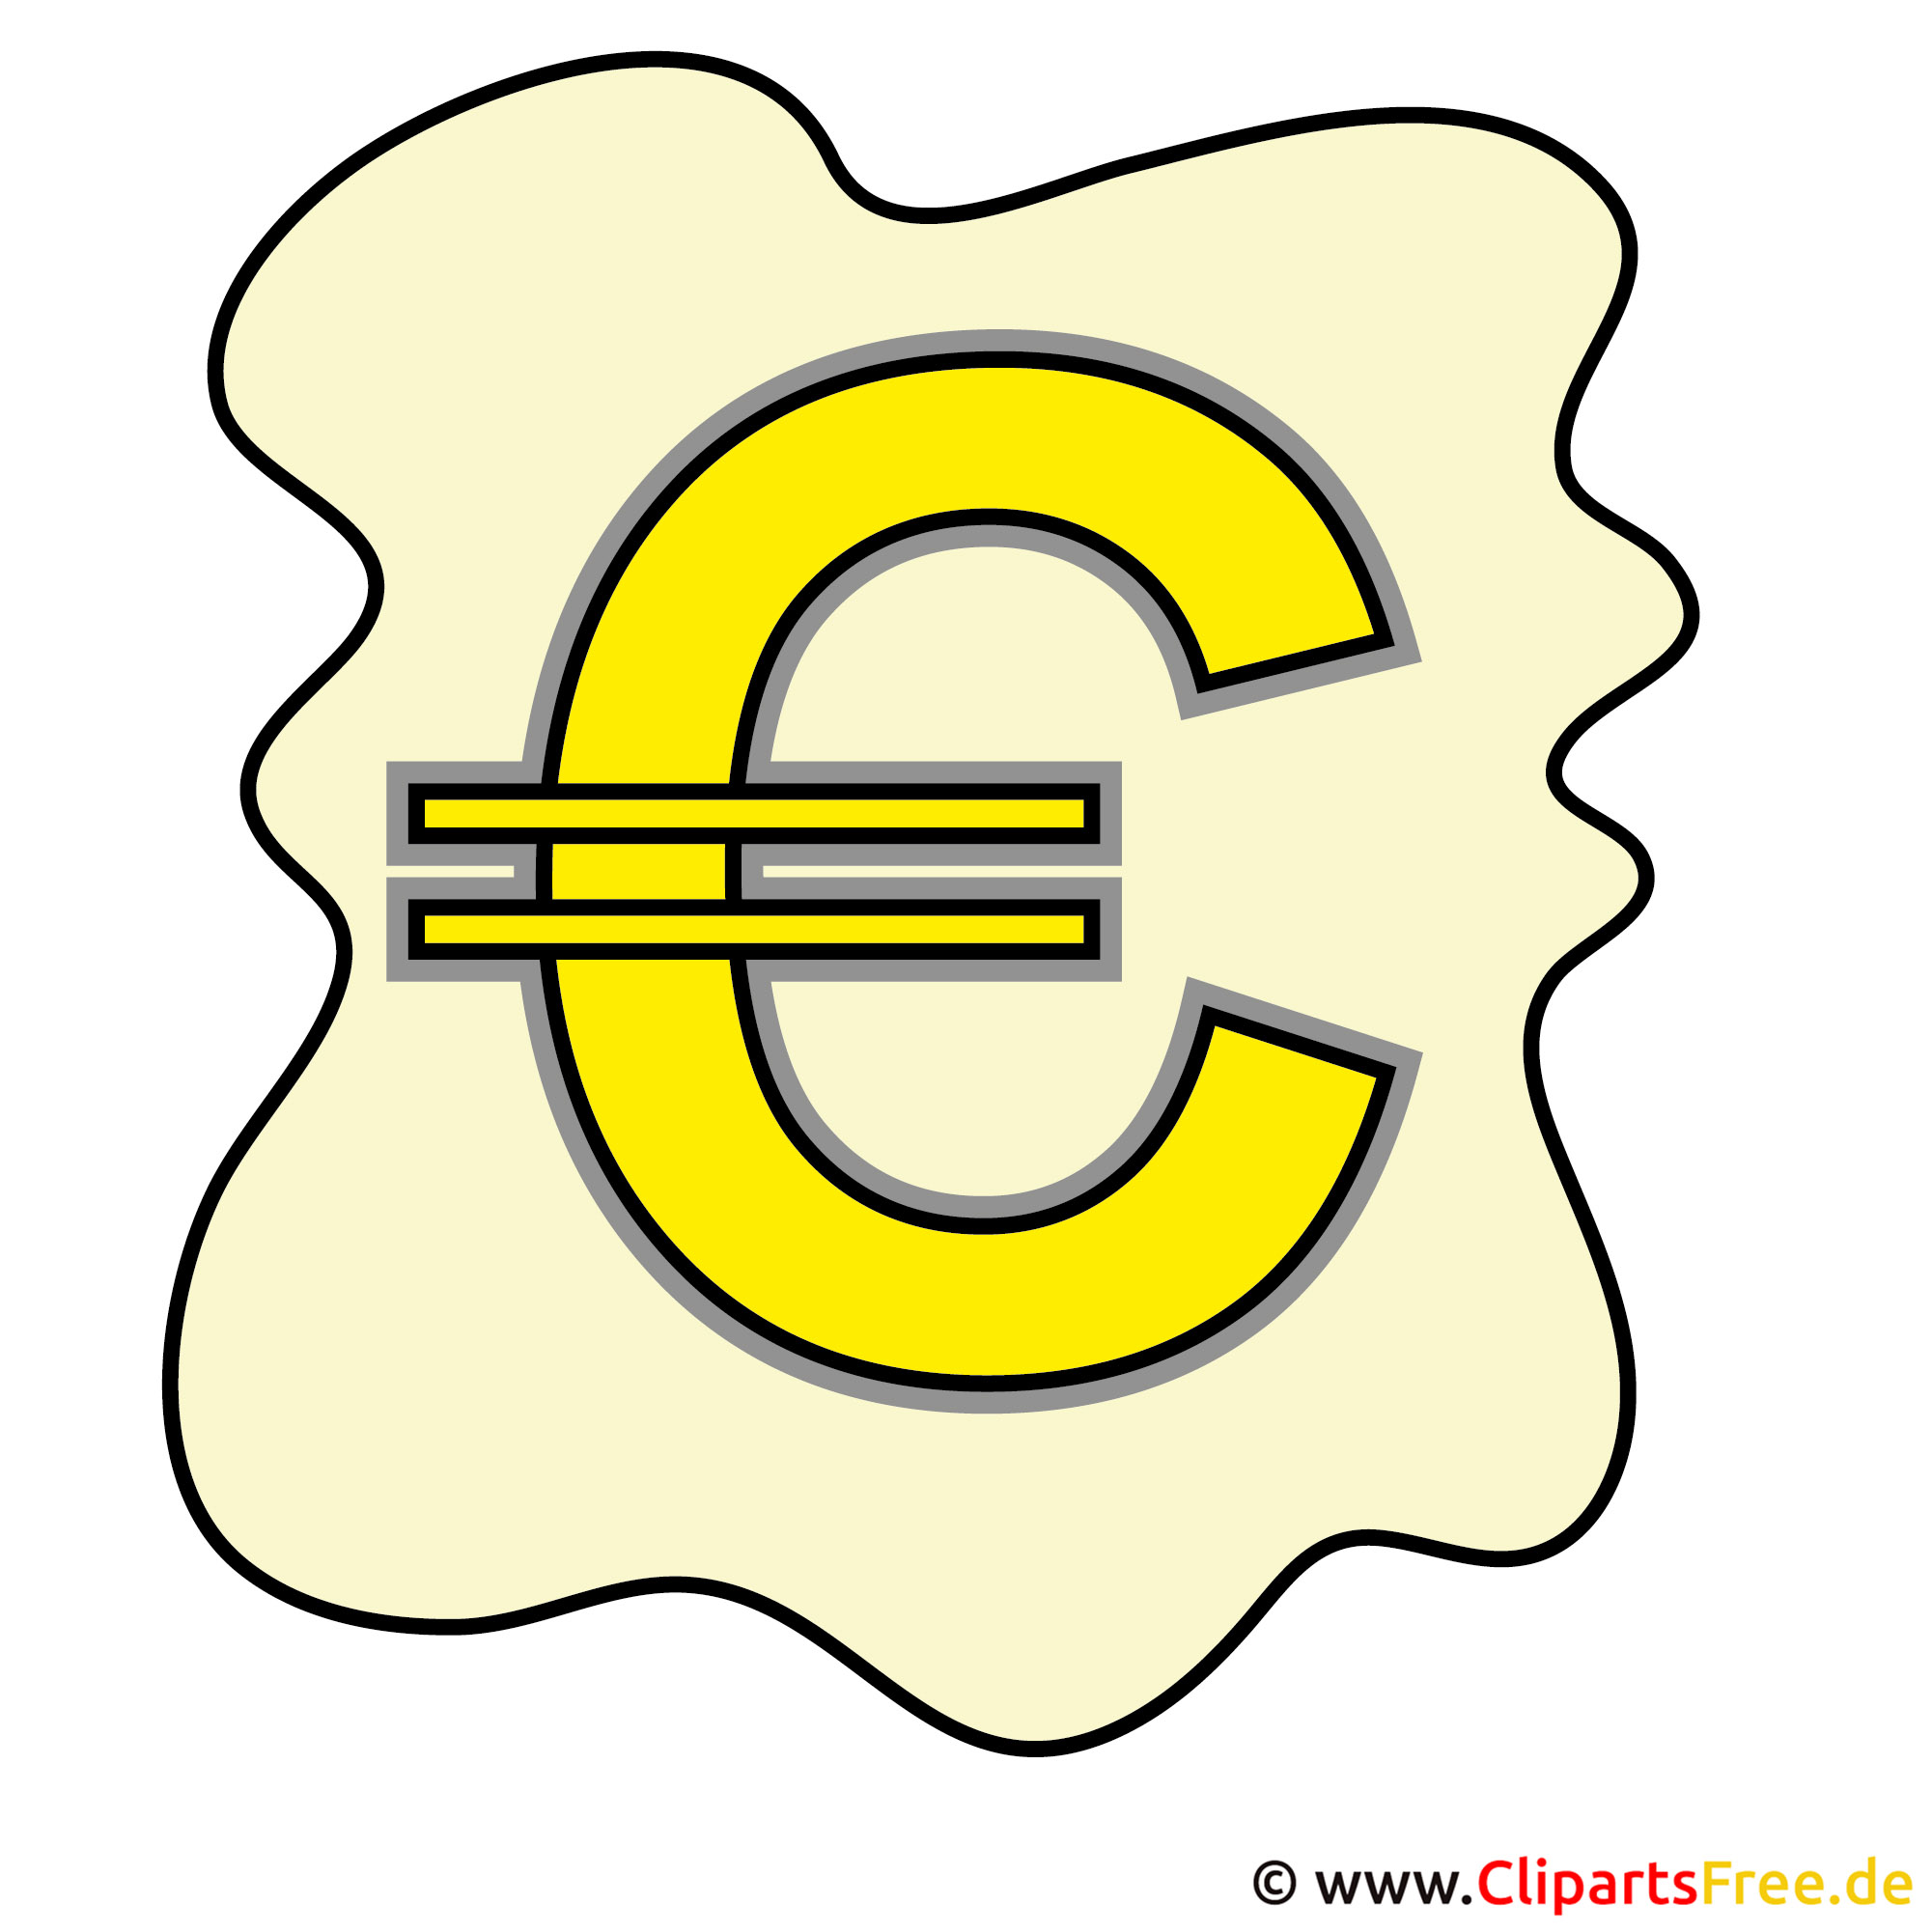 euro currency clipart - photo #14